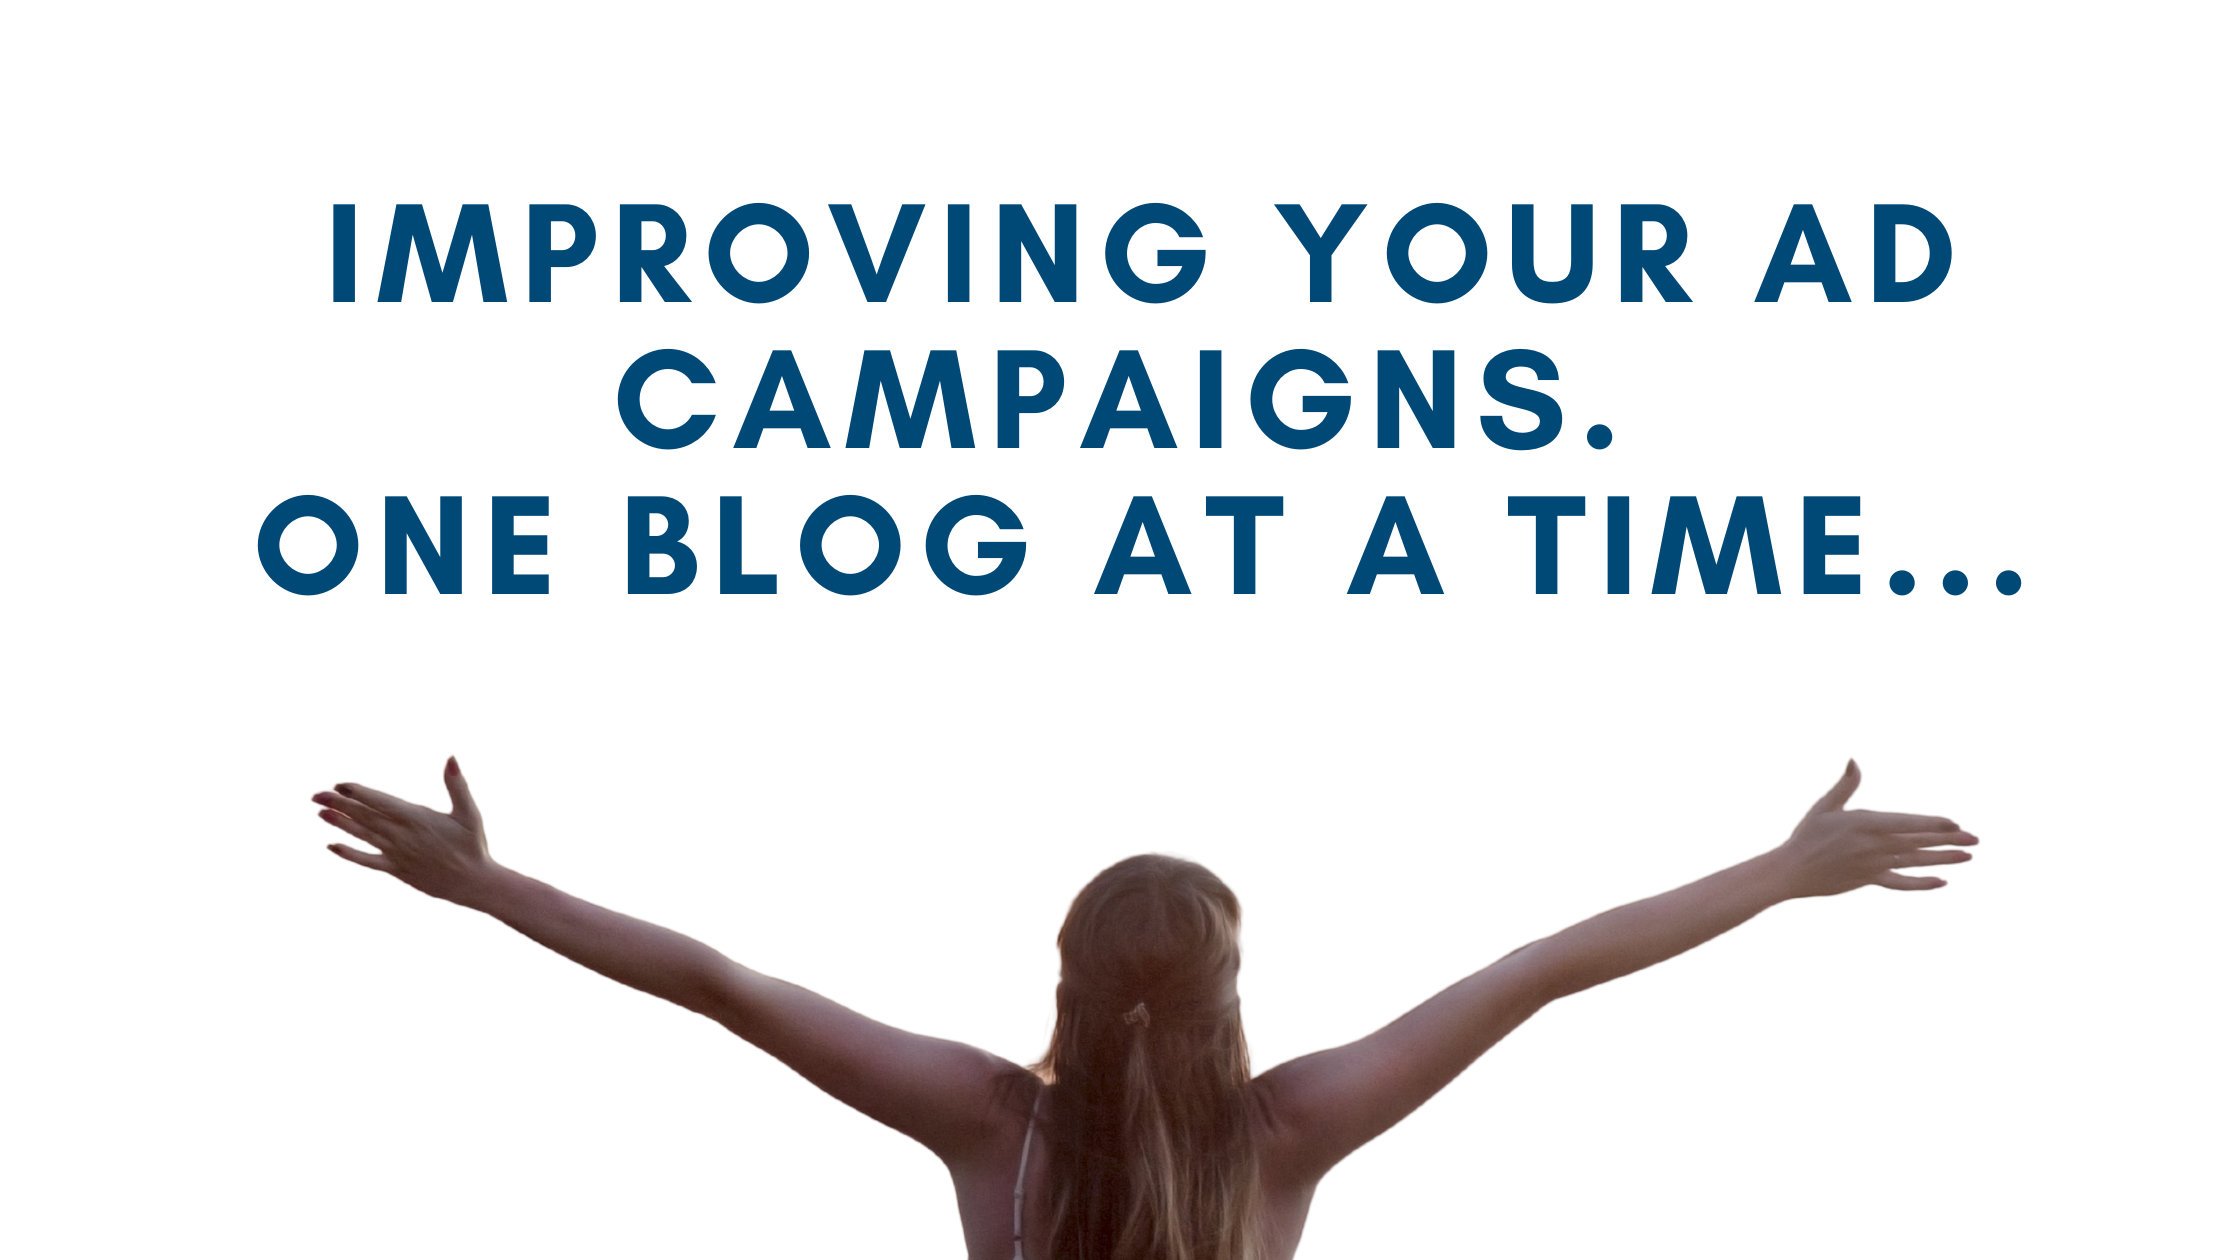 Making Your Ad Campaigns Perform Better. One Blog at a time.